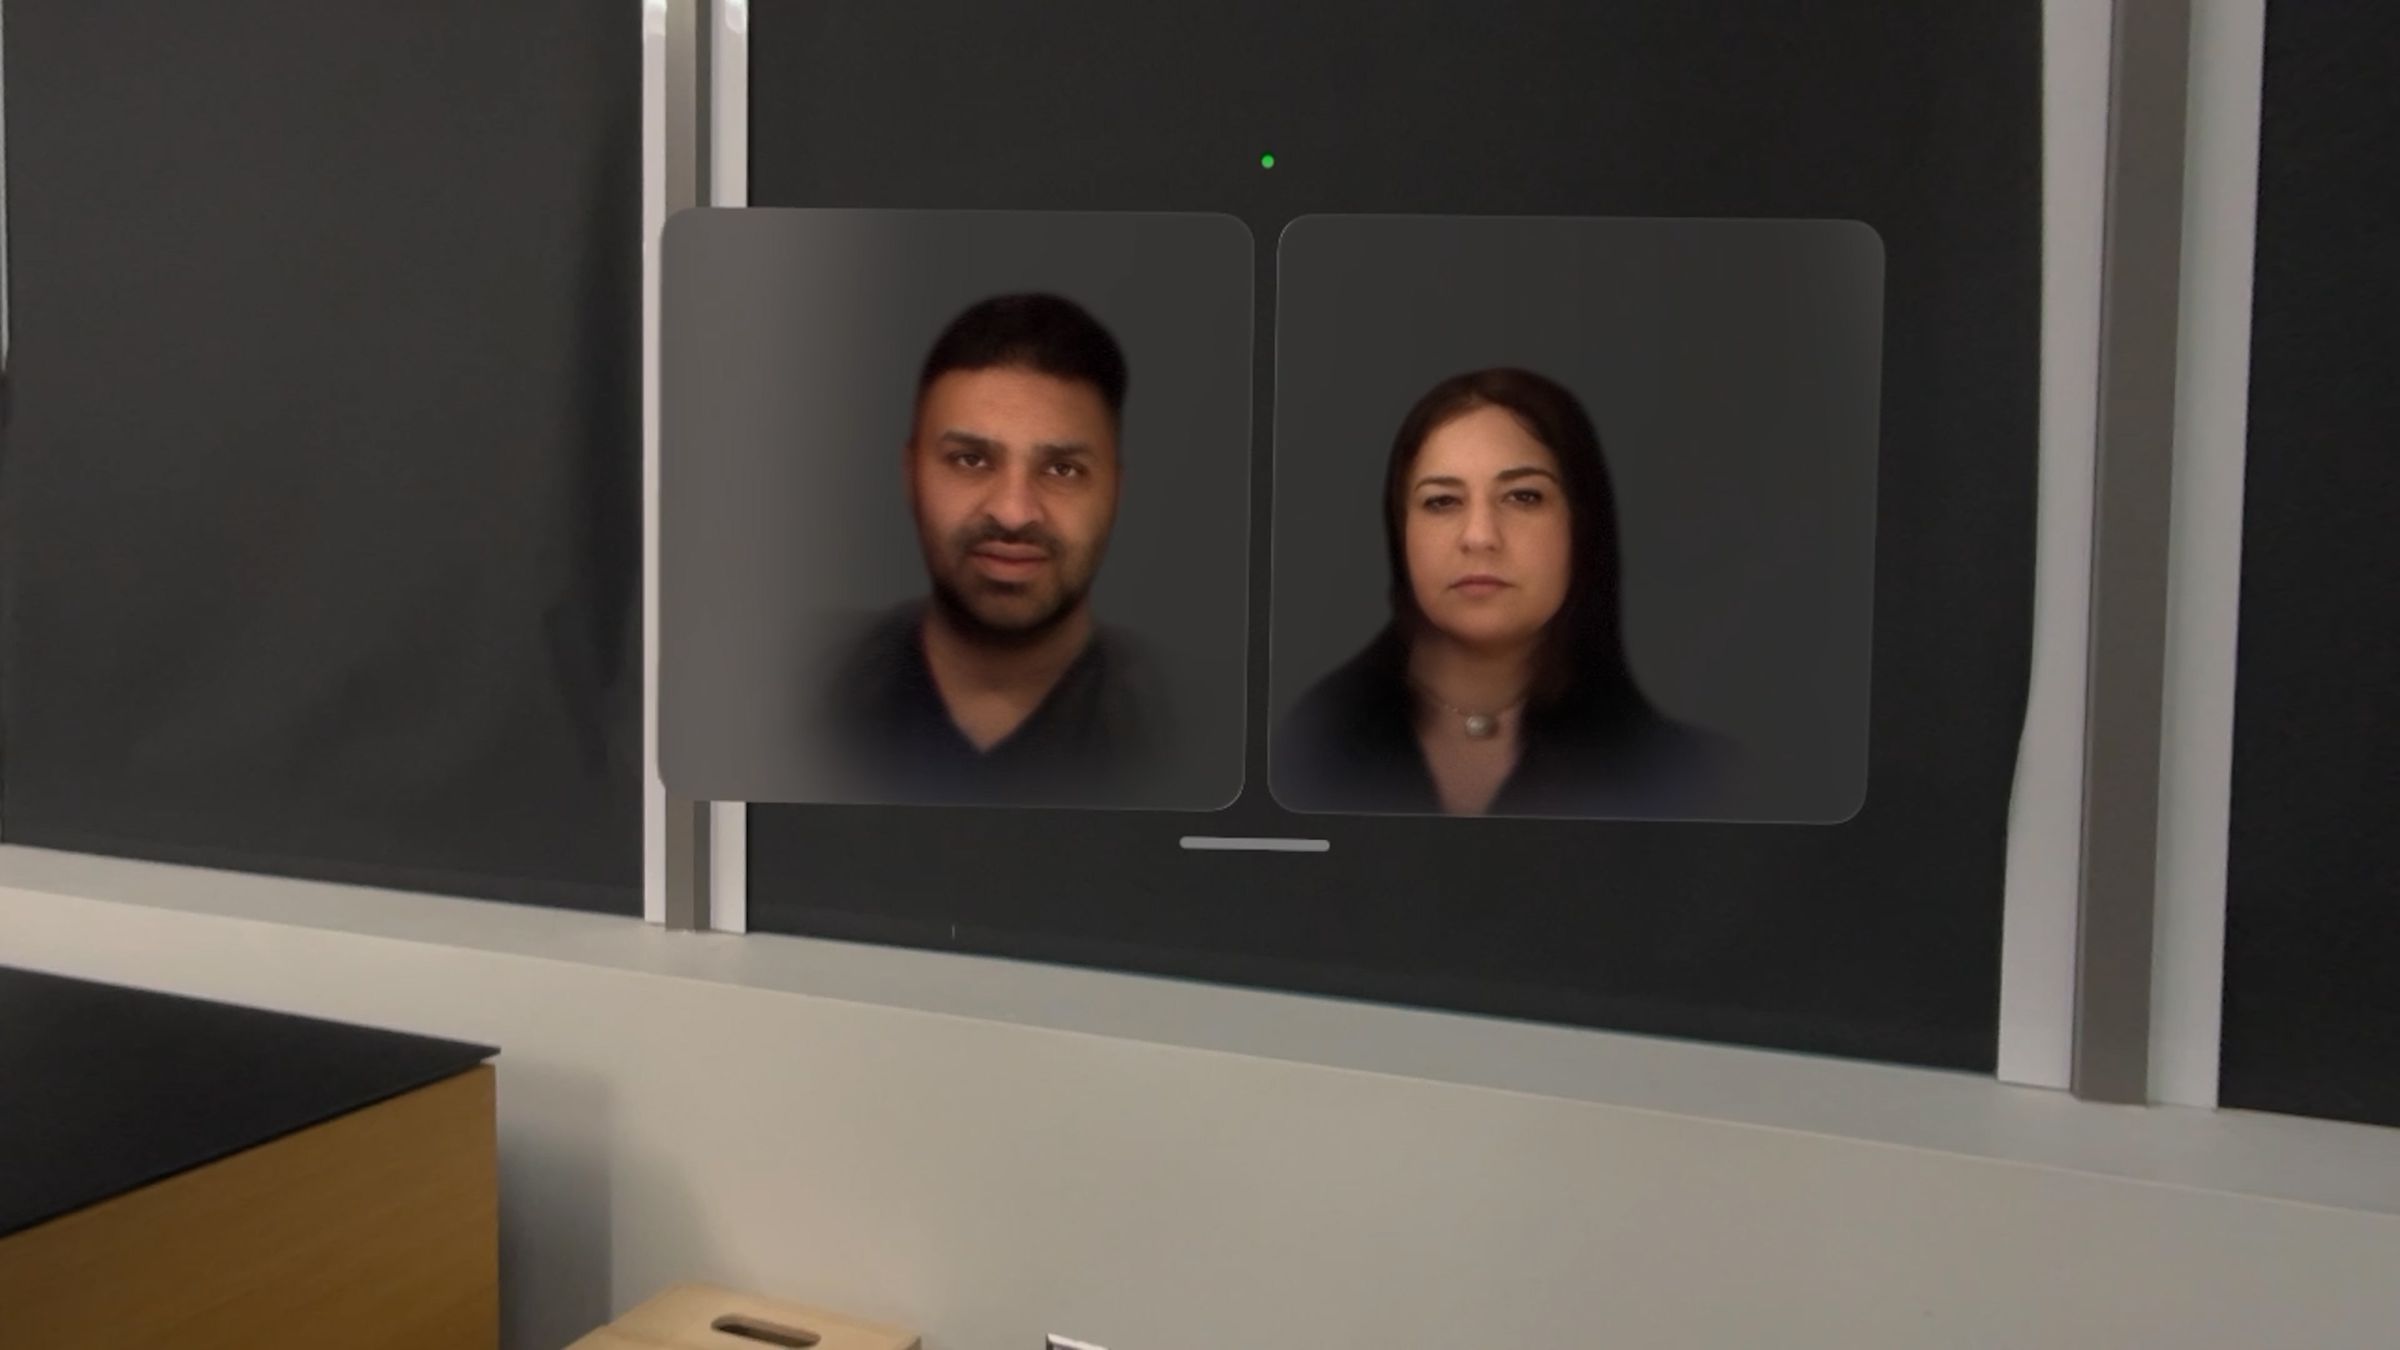 Video call with Nilay Patel and Joanna Stern using 3D personas on the Vision Pro